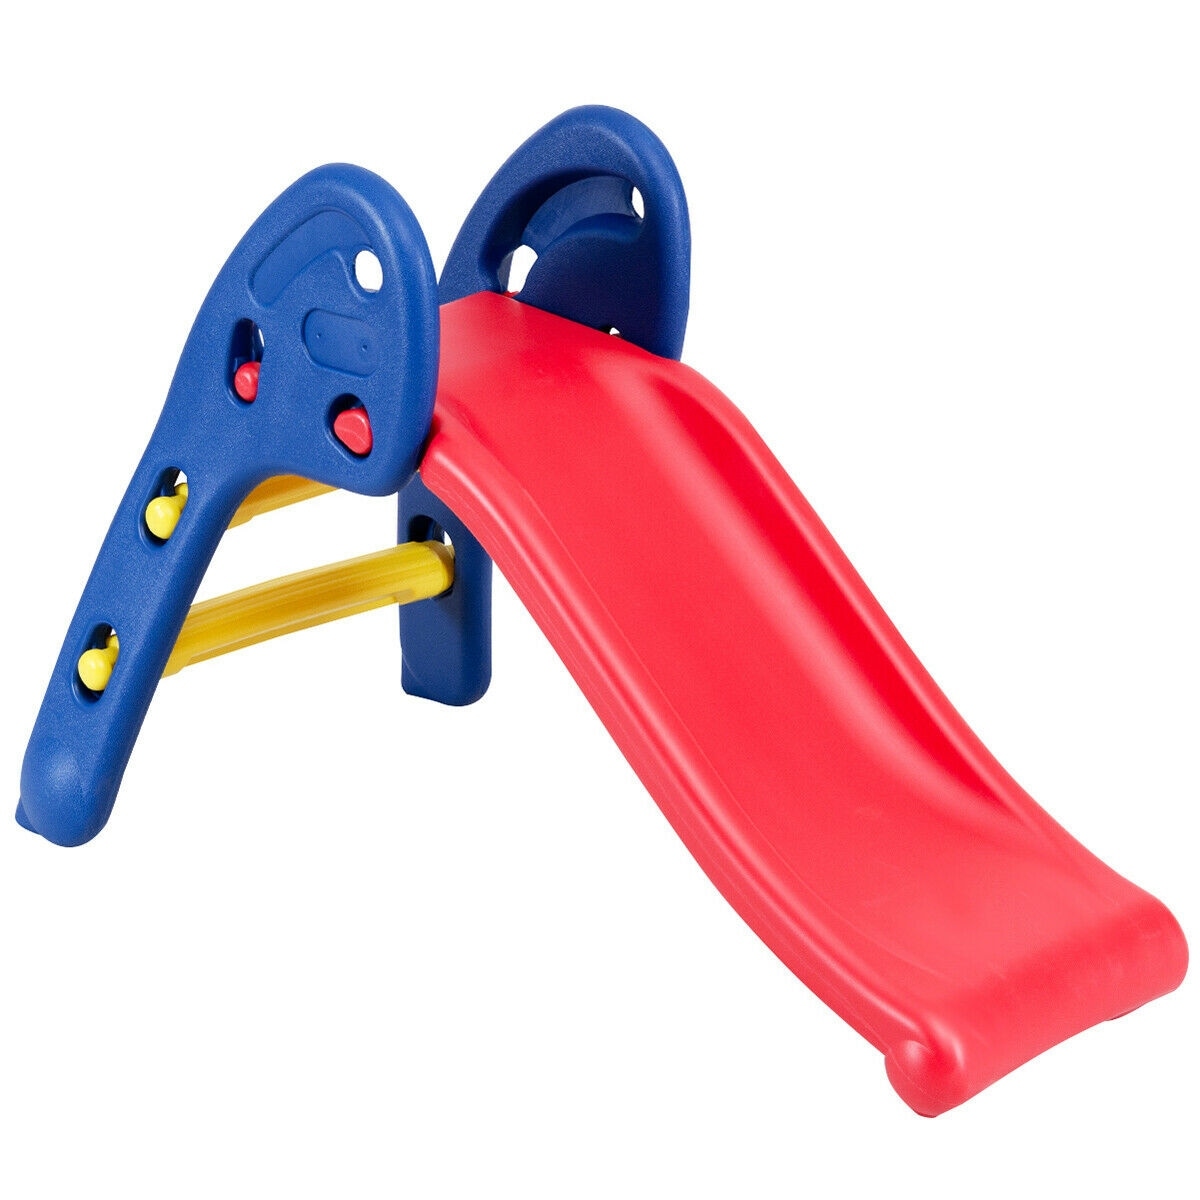 https://ak1.ostkcdn.com/images/products/is/images/direct/bd5f8b9667c292975b38a0f9c70b2b26e8750375/Costway-Step-2-Children-Folding-Slide-Plastic-Fun-Toy-Up-down-Kids.jpg